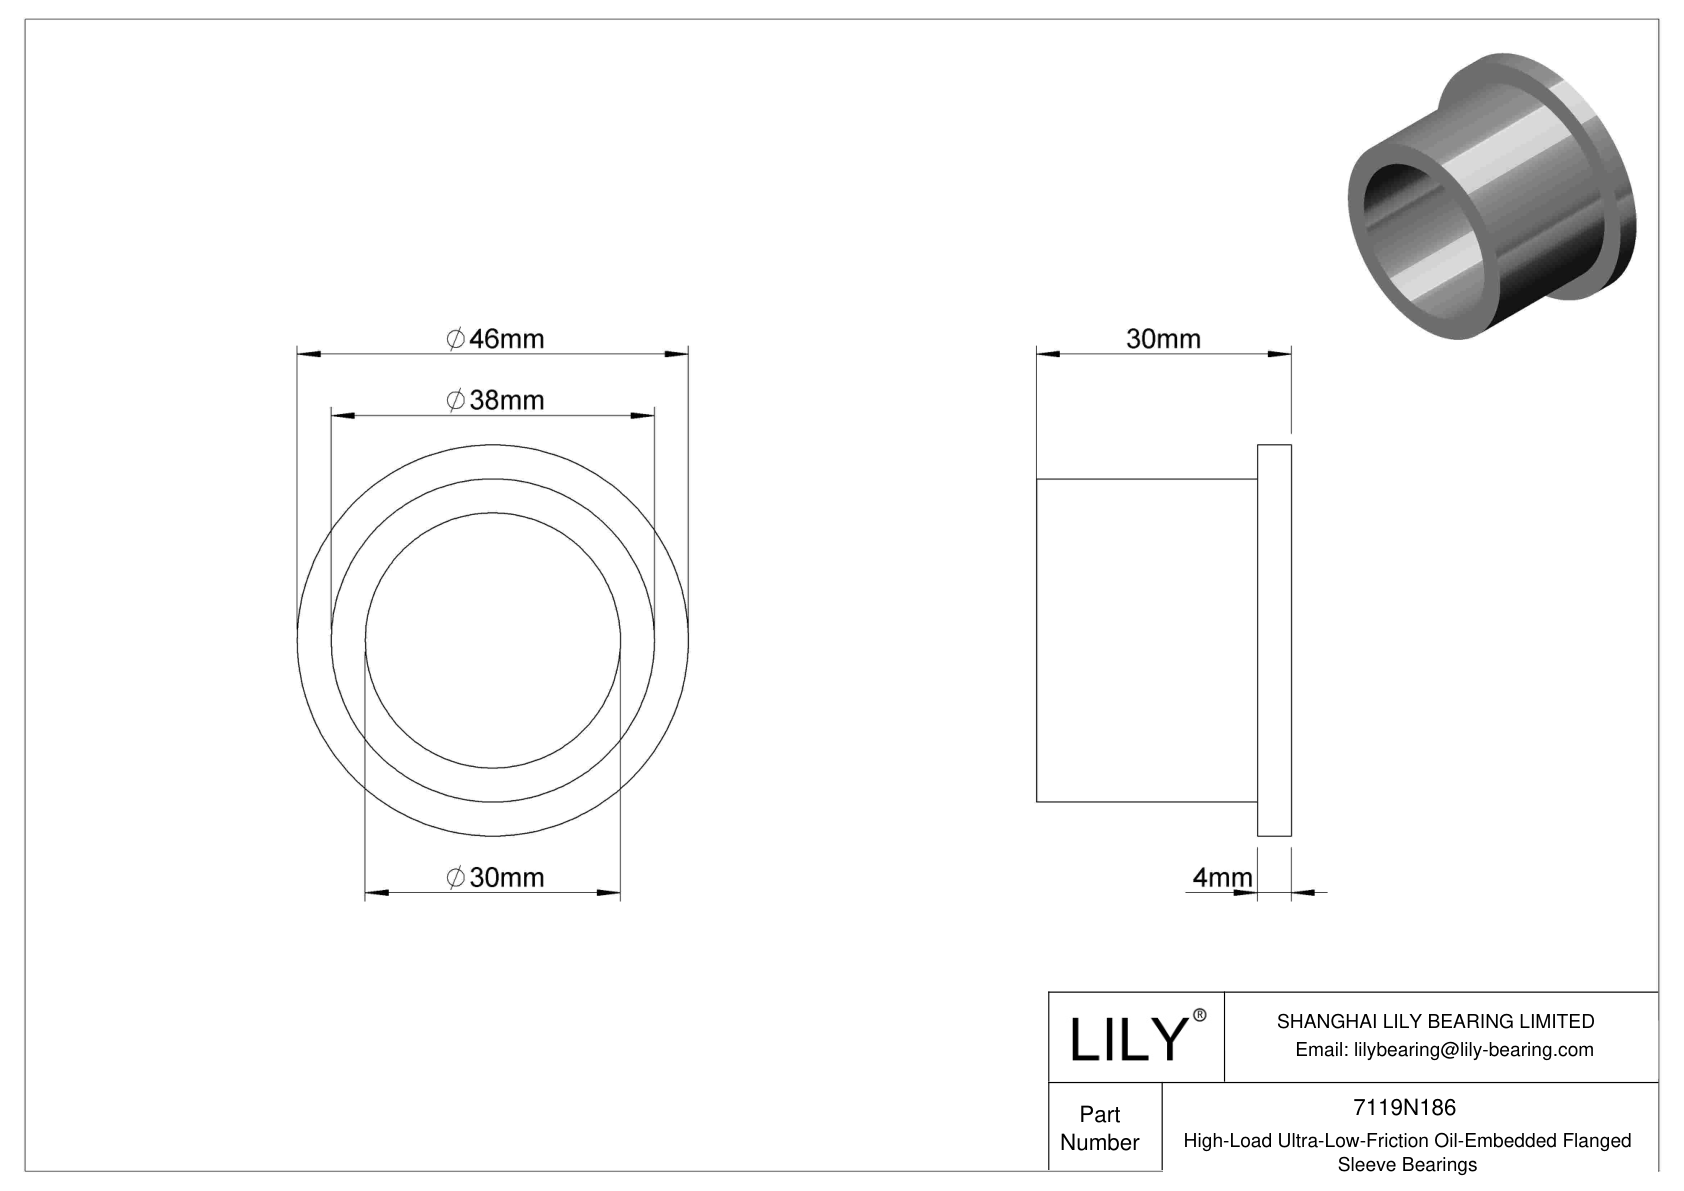 HBBJNBIG High-Load Ultra-Low-Friction Oil-Embedded Flanged Sleeve Bearings cad drawing